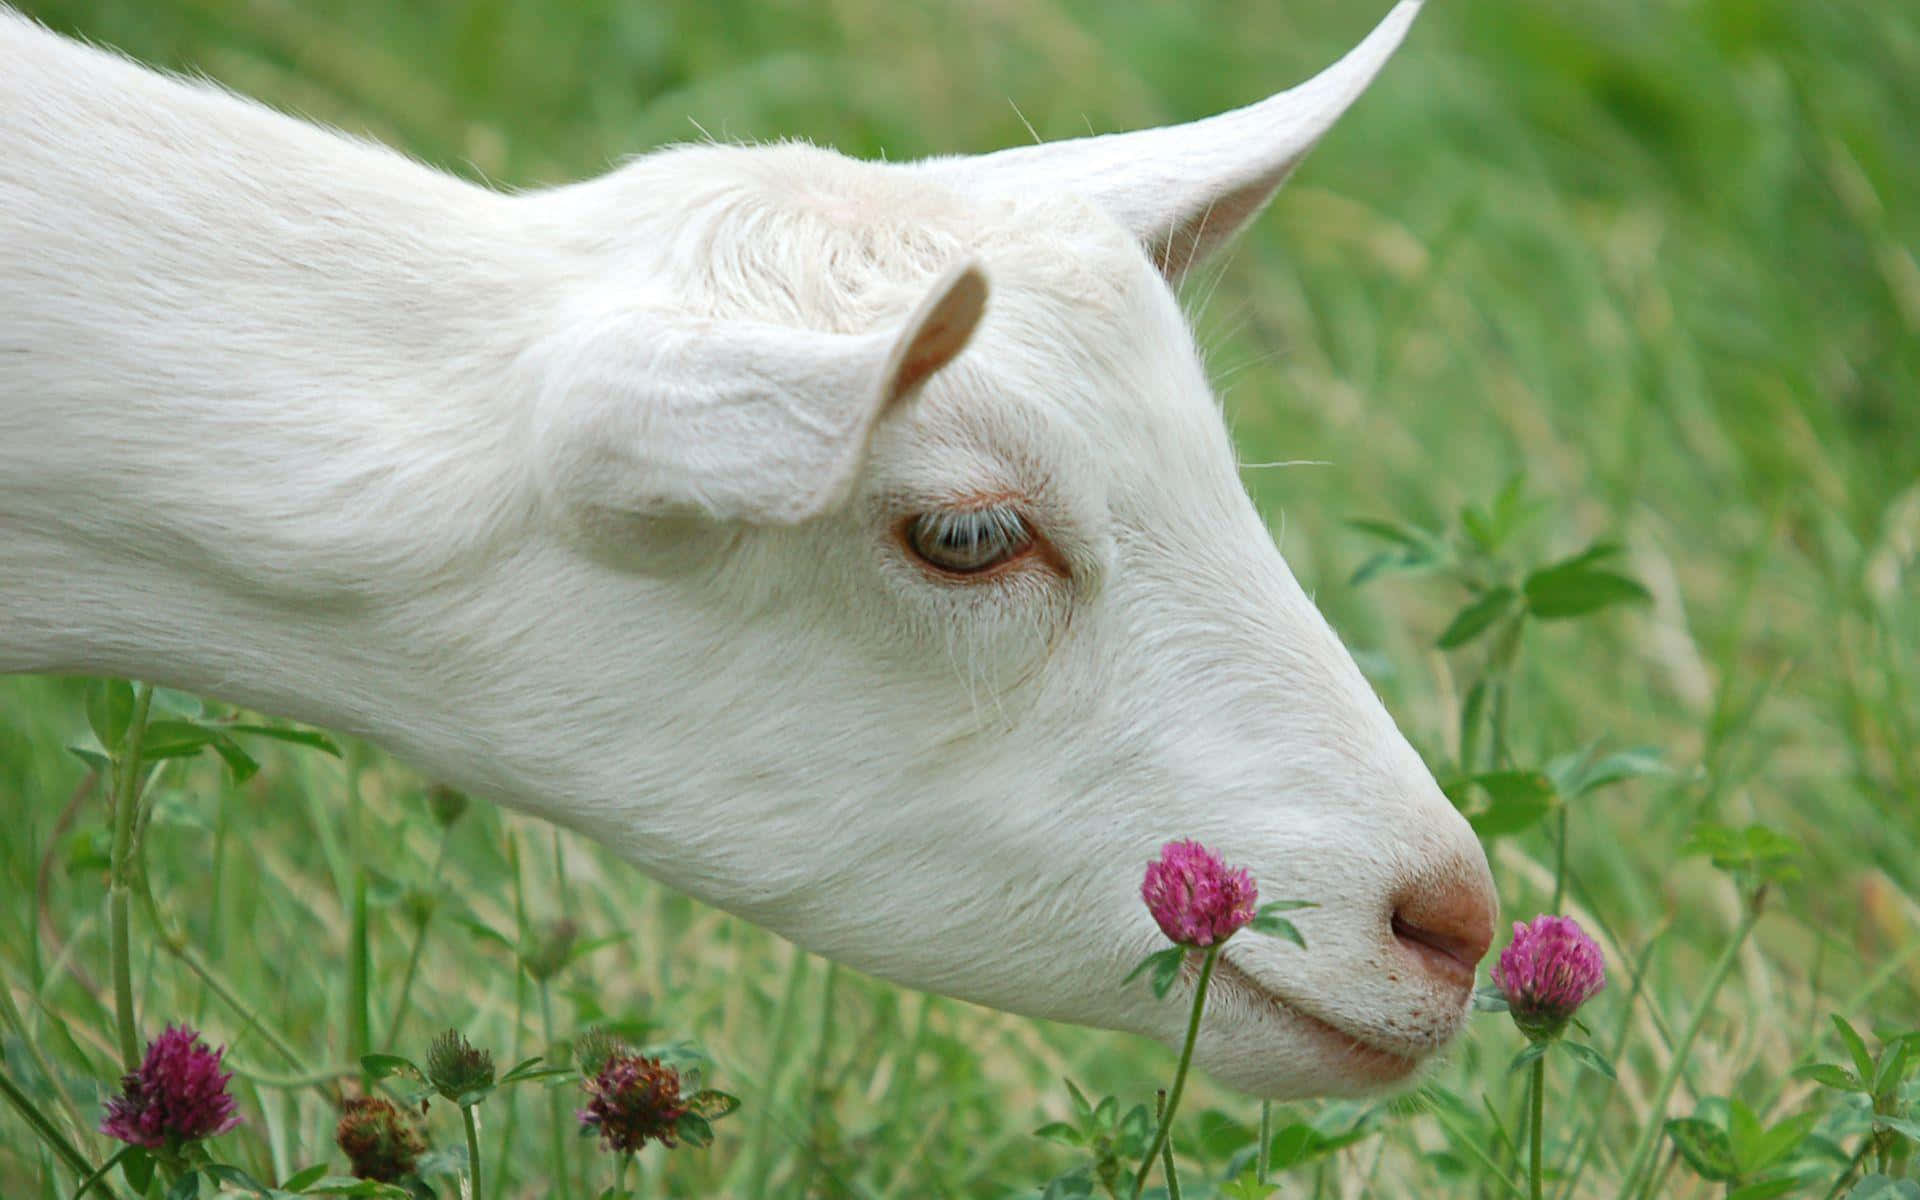 A close-up of a goat's face